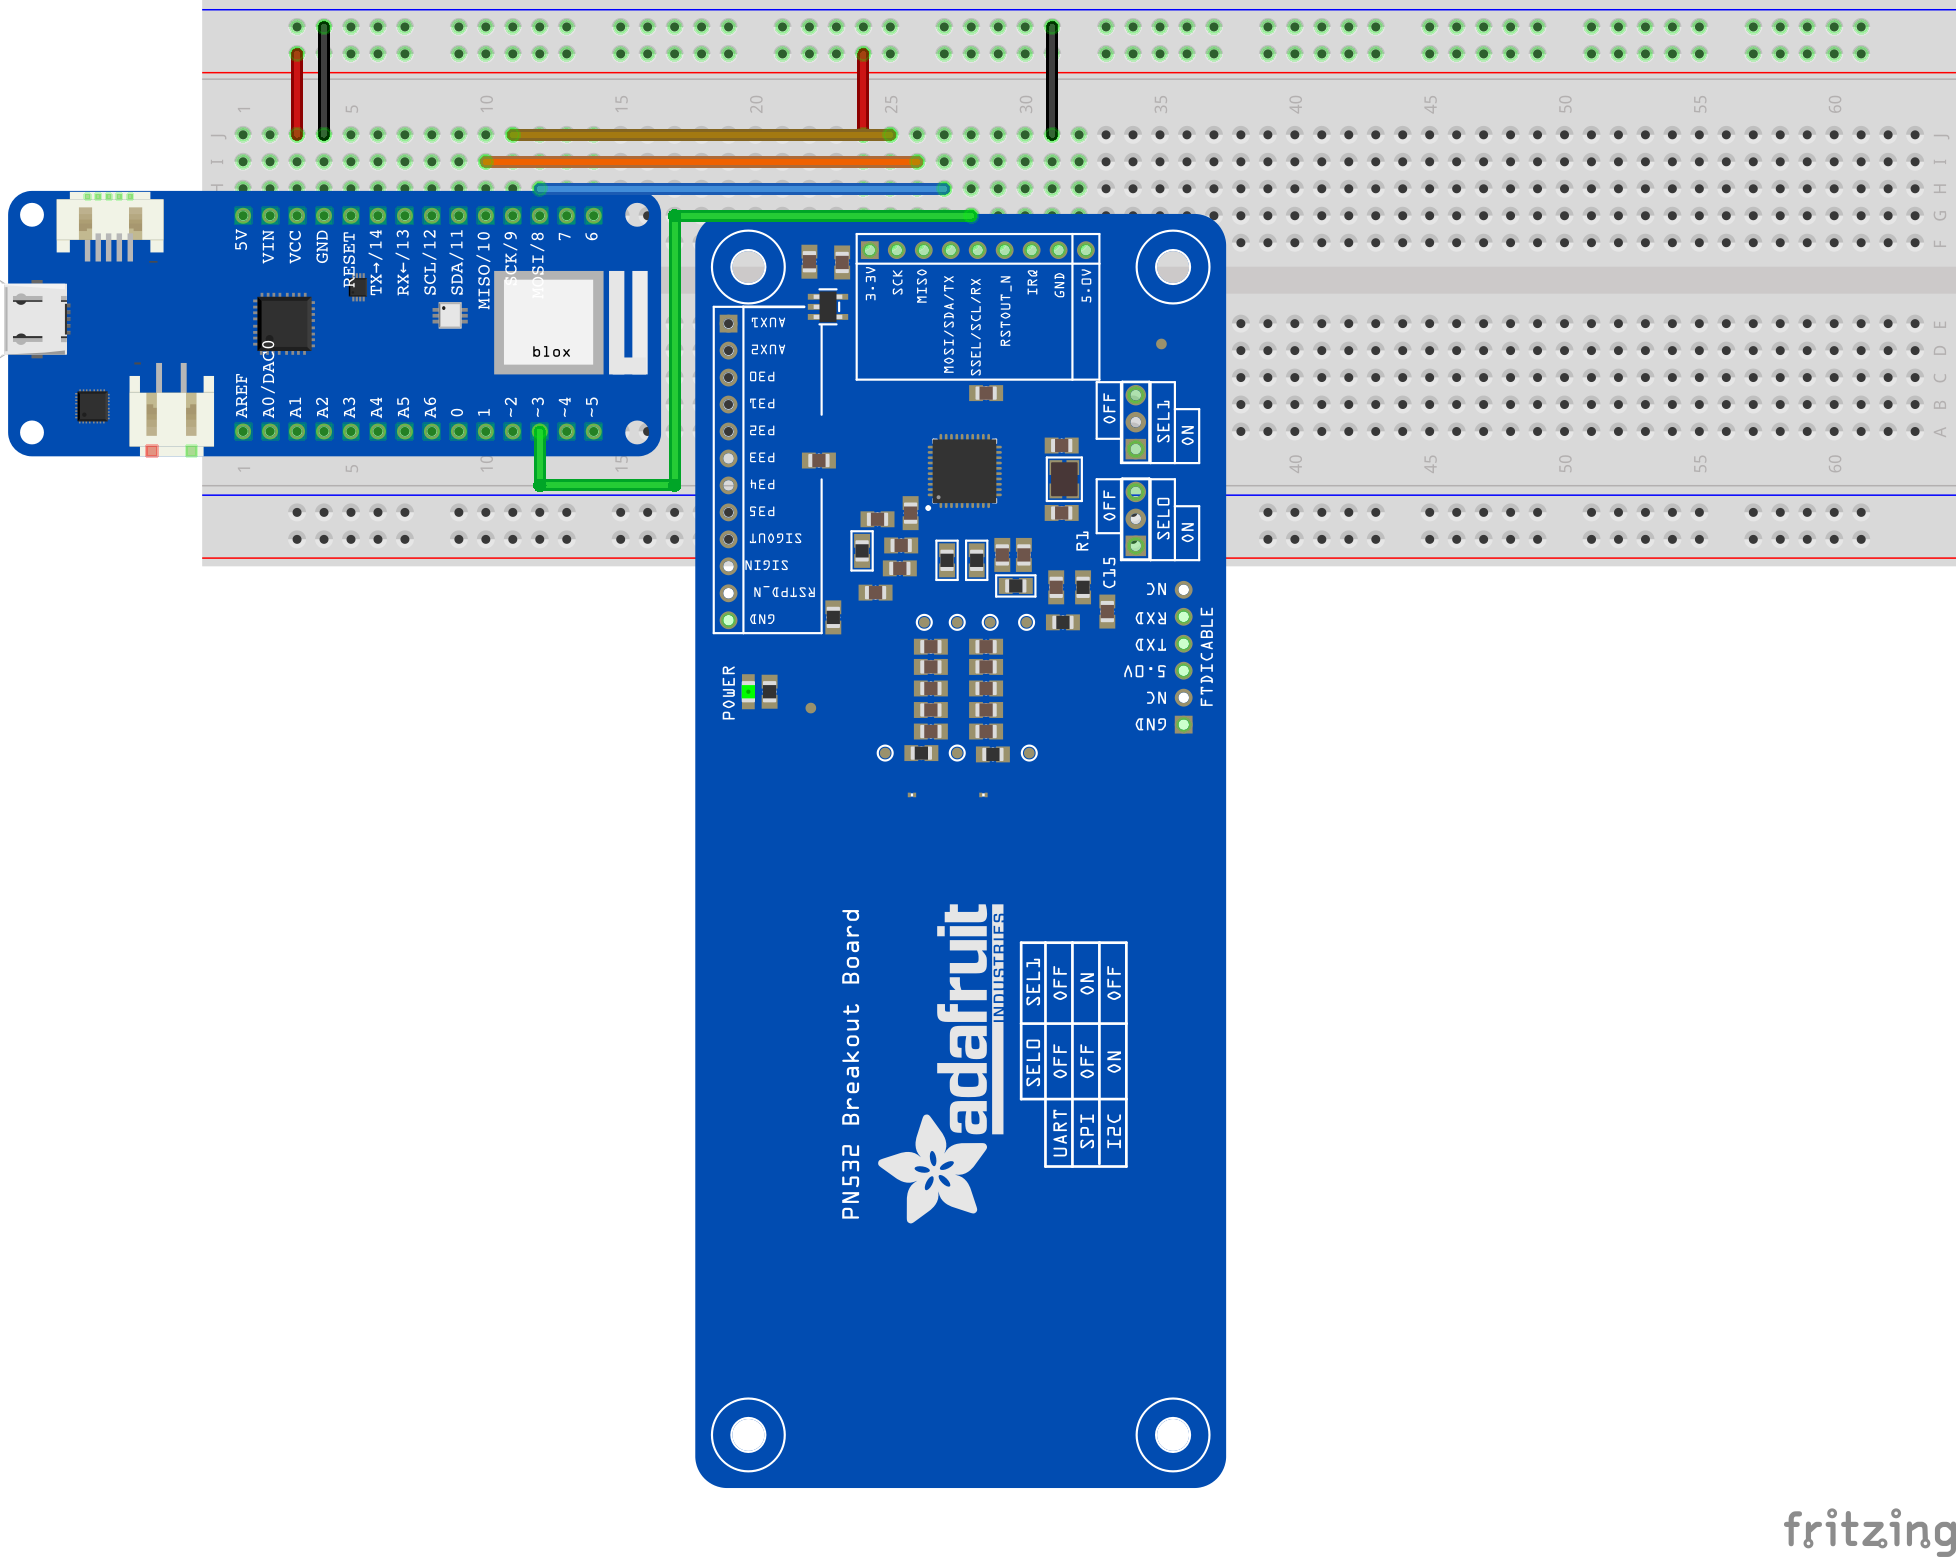 Wire the MKR WiFi 1010 and the PN532 together on a solderless breadboard, using the SPI interface.